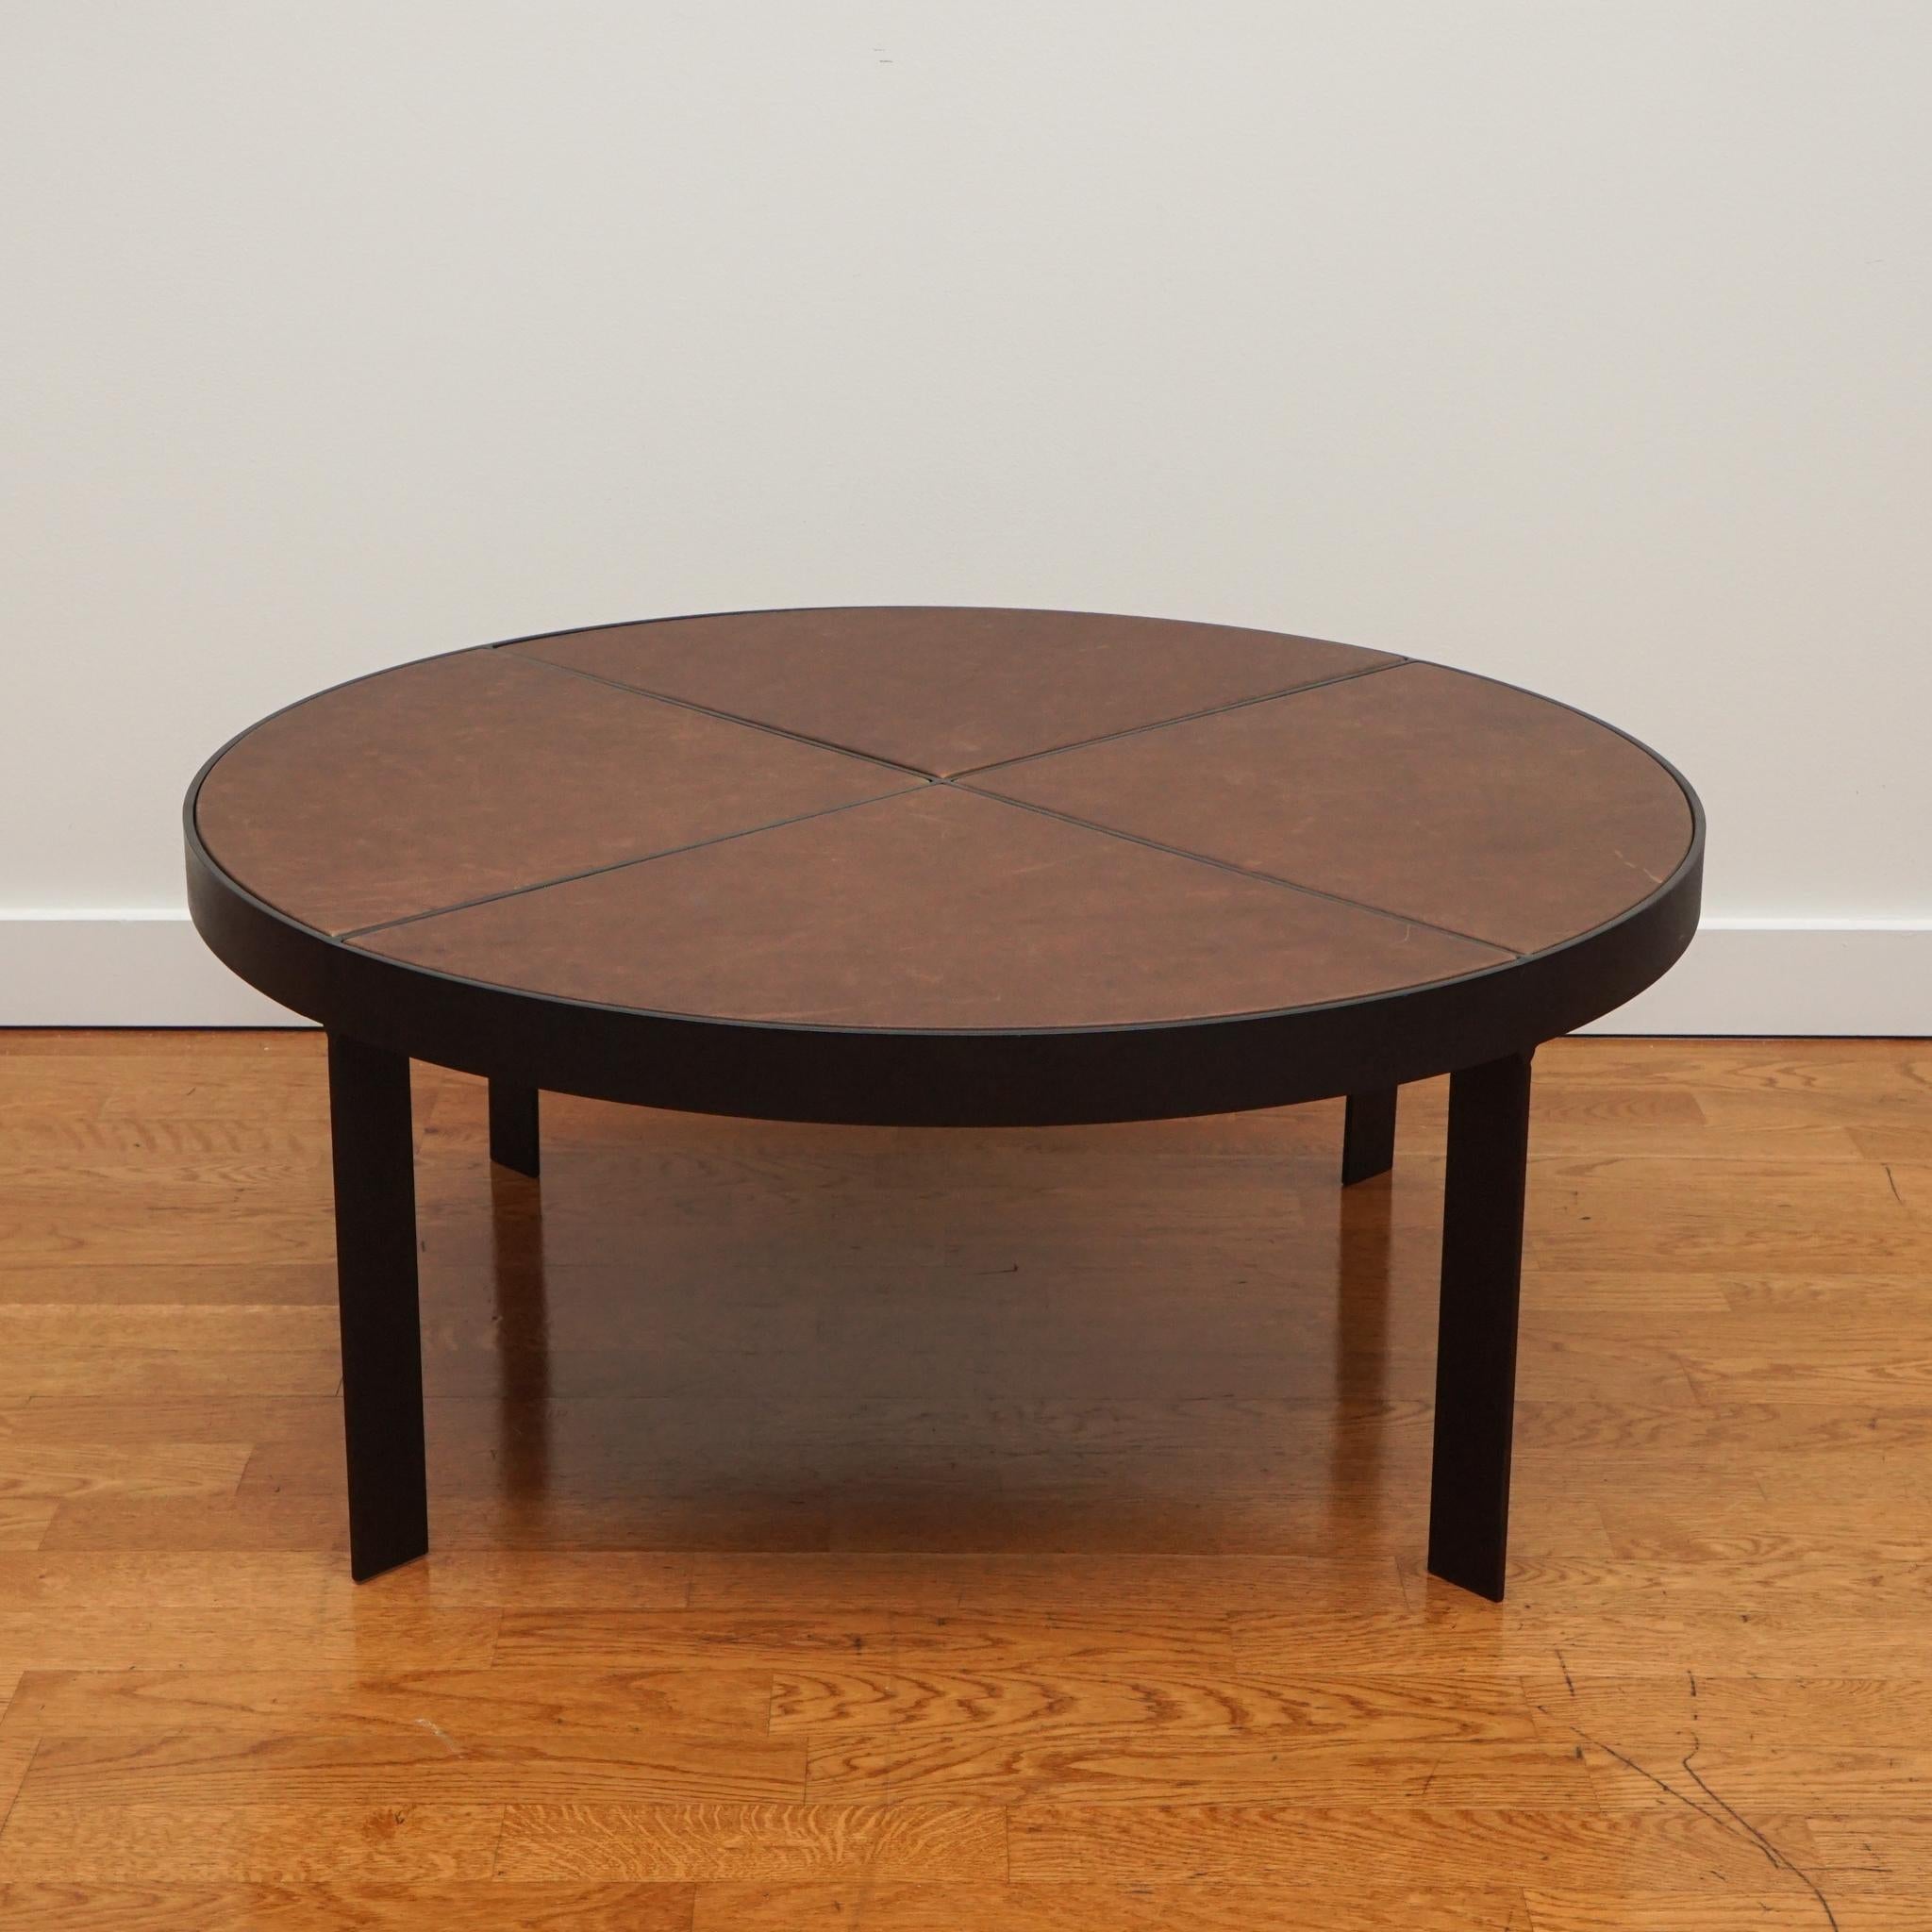 The Bruges coffee table is distinctive for its iron frame base and leather covered top surface. Generous in size and solidly made. It is displayed here in Berkshire Bourbon leather.  Beautiul sleek lines and sophisticated look, allows it to be an